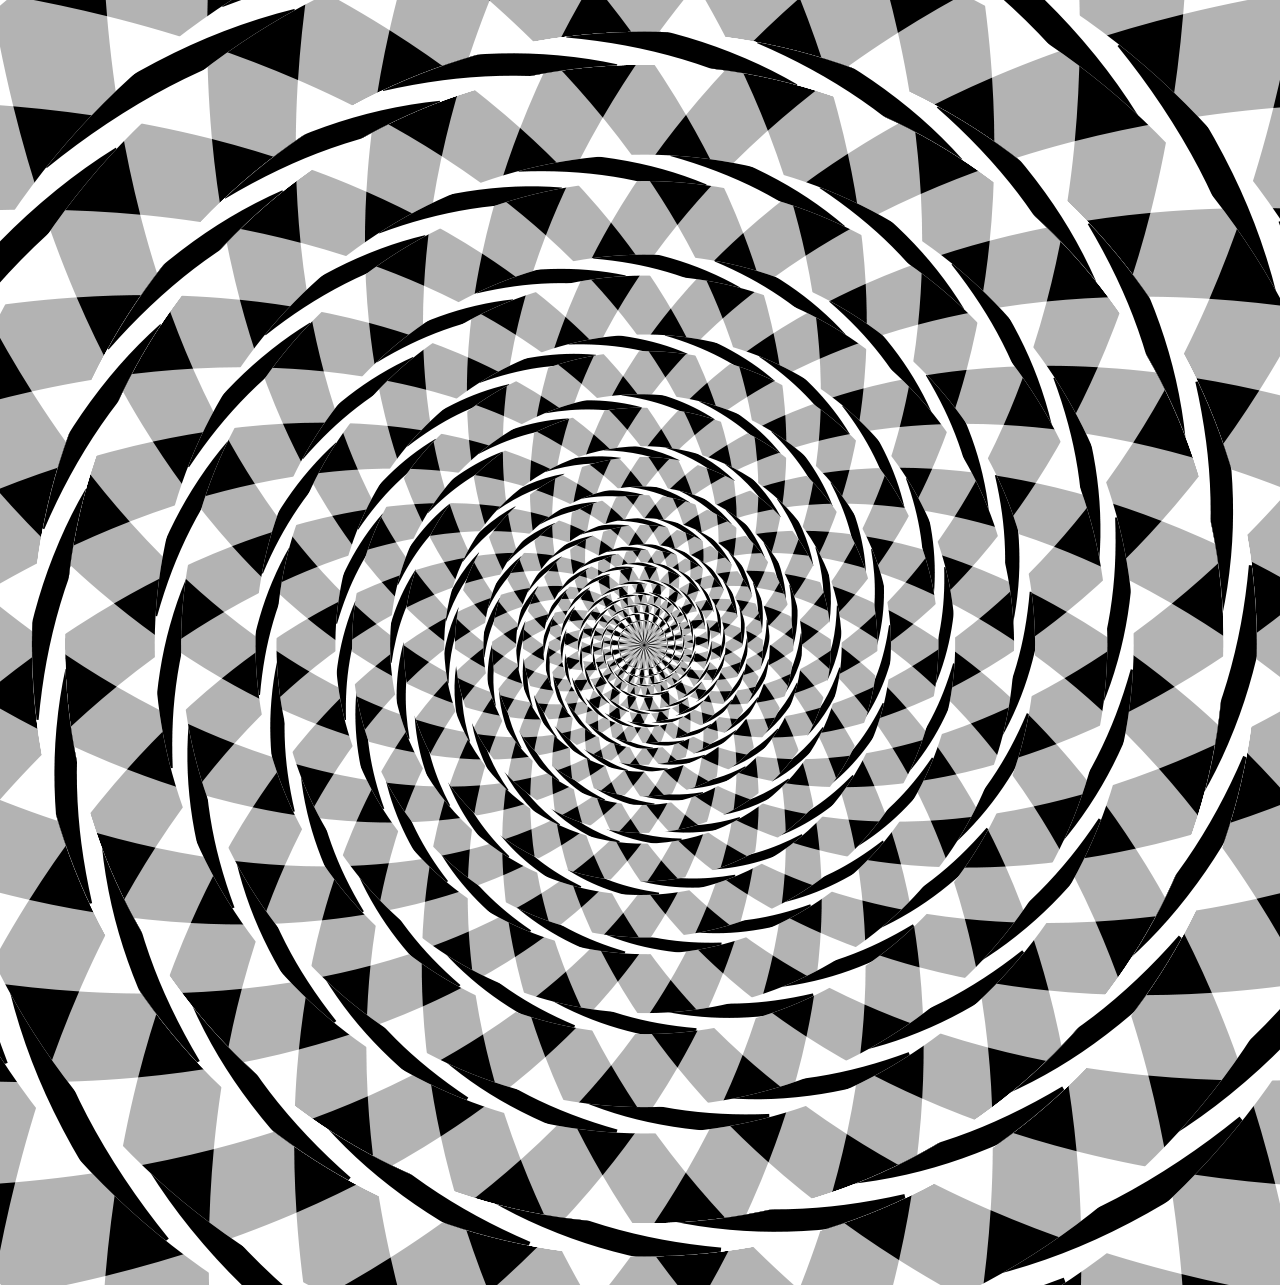 3 types of optical illusions are a union of science and art - Big Think